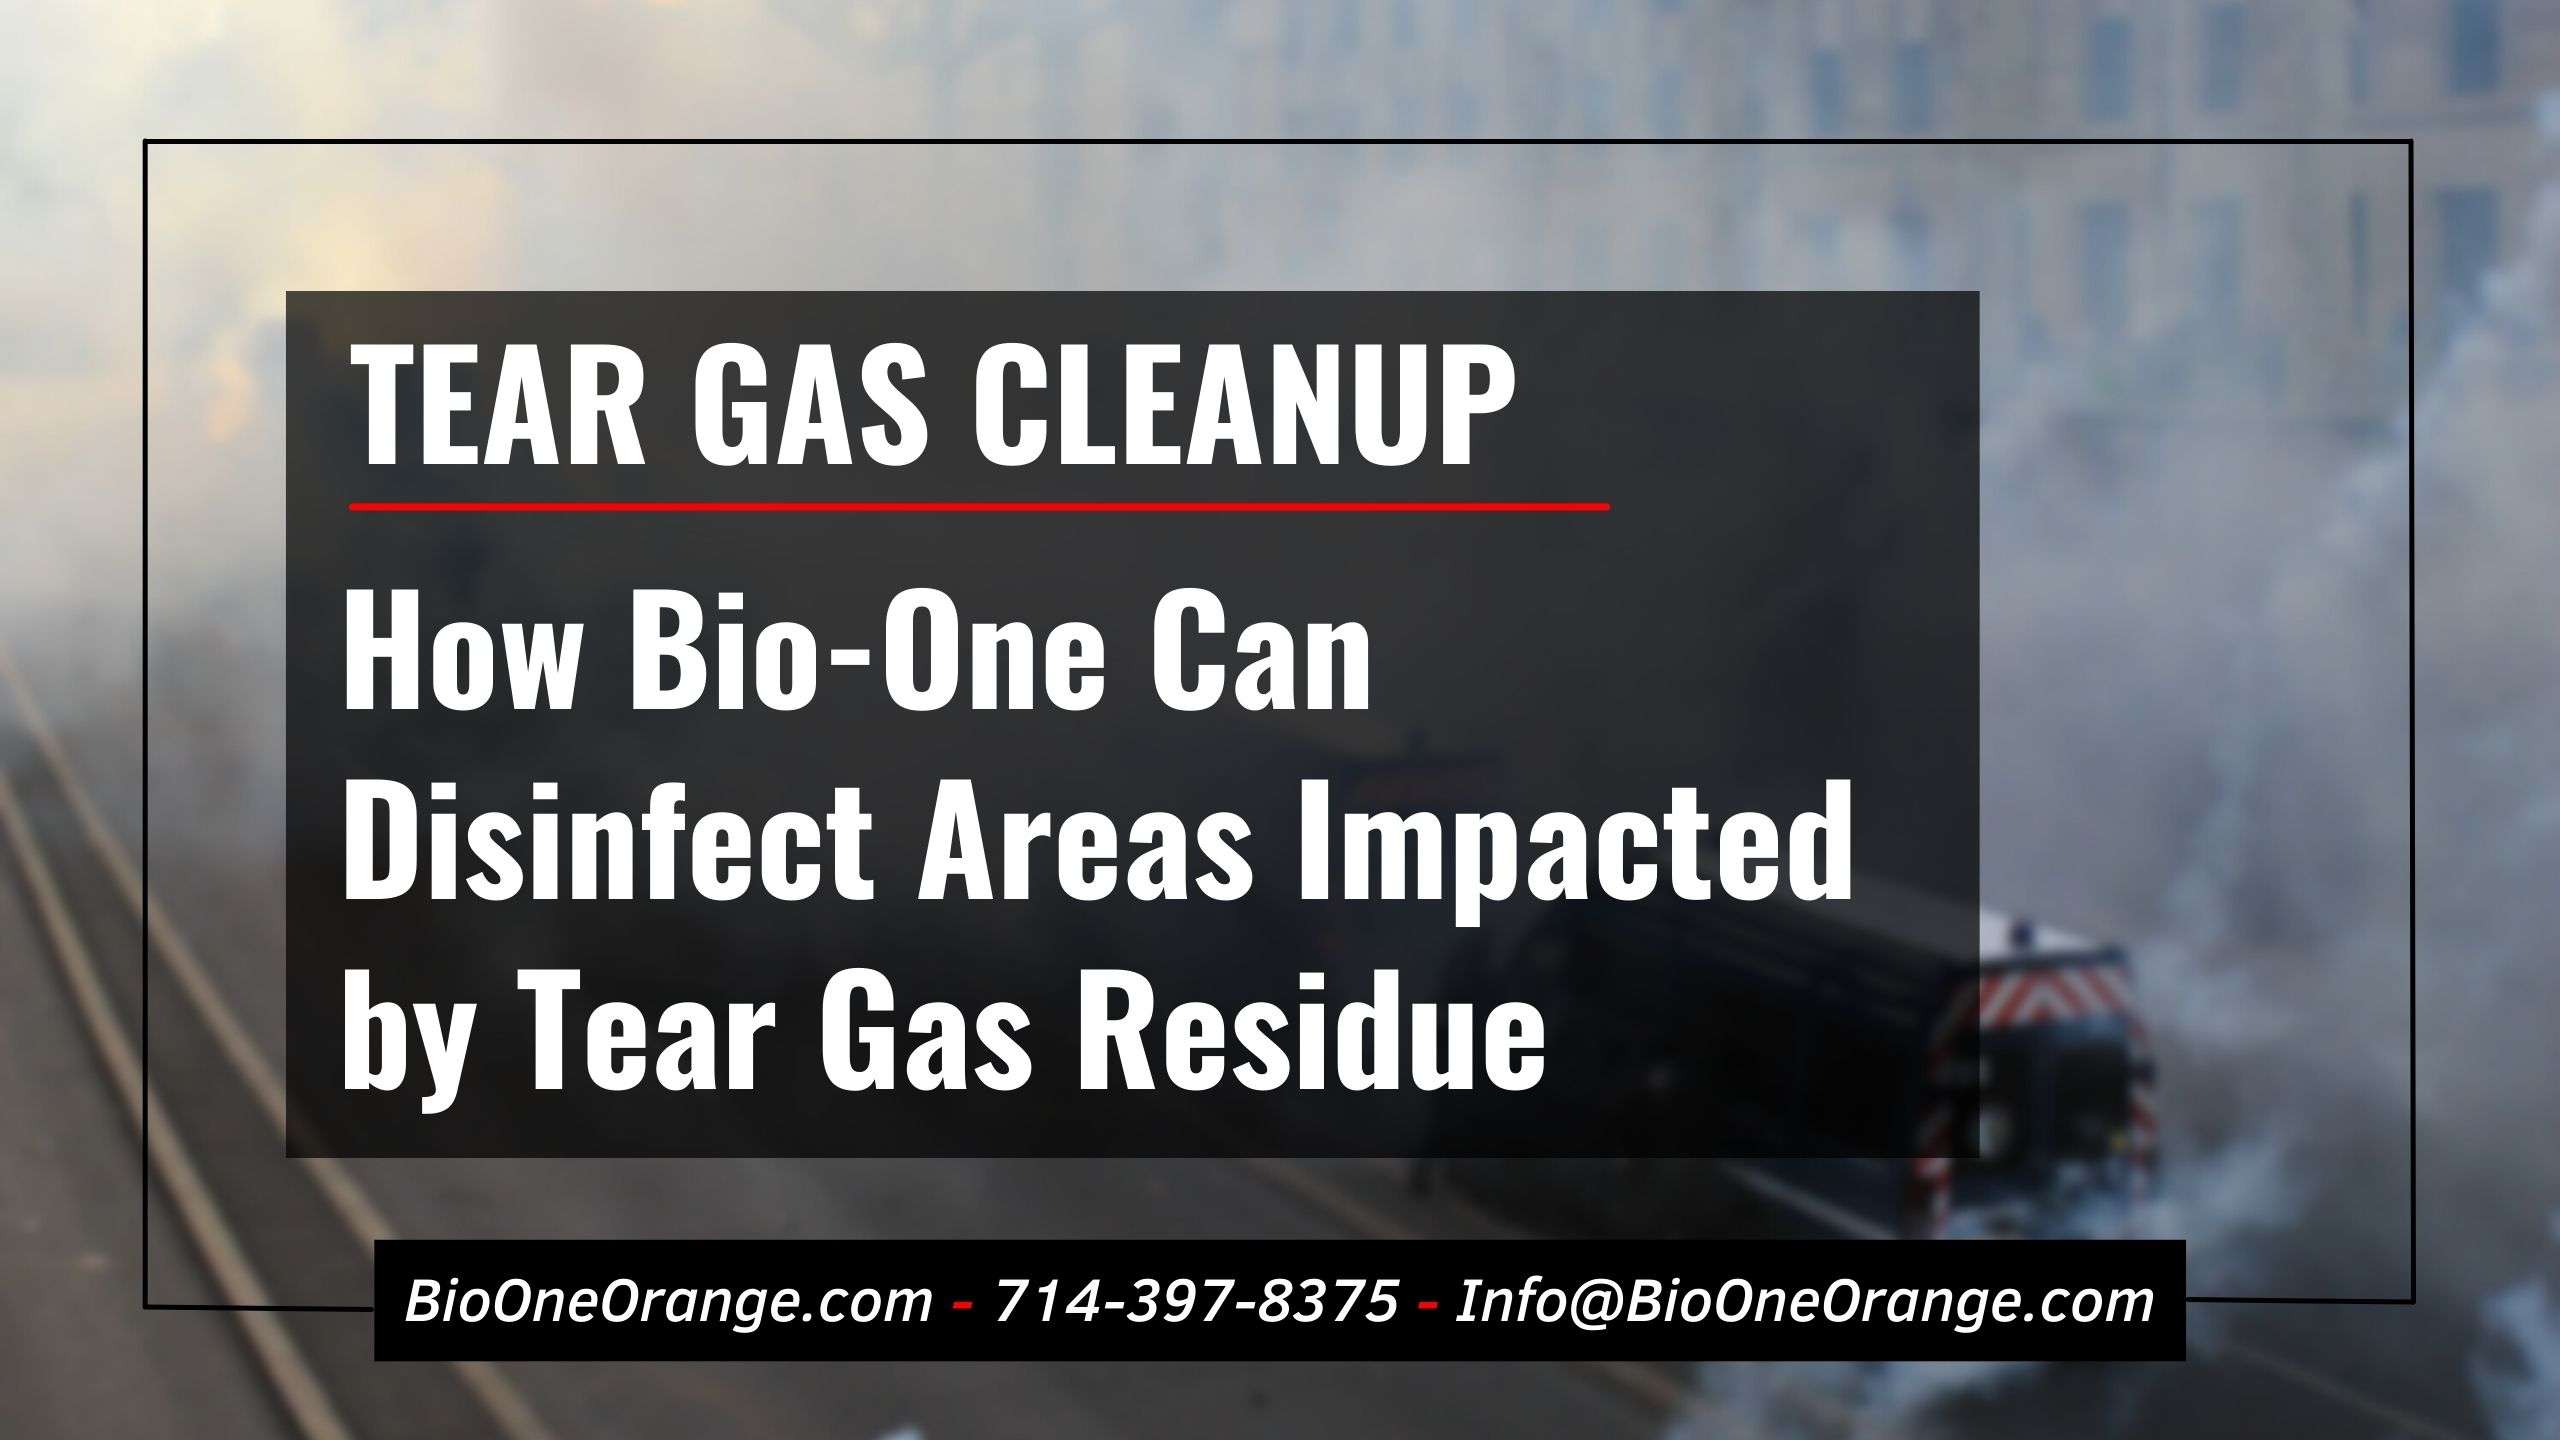 How Bio-One Can Disinfect Areas Impacted by Tear Gas Residue